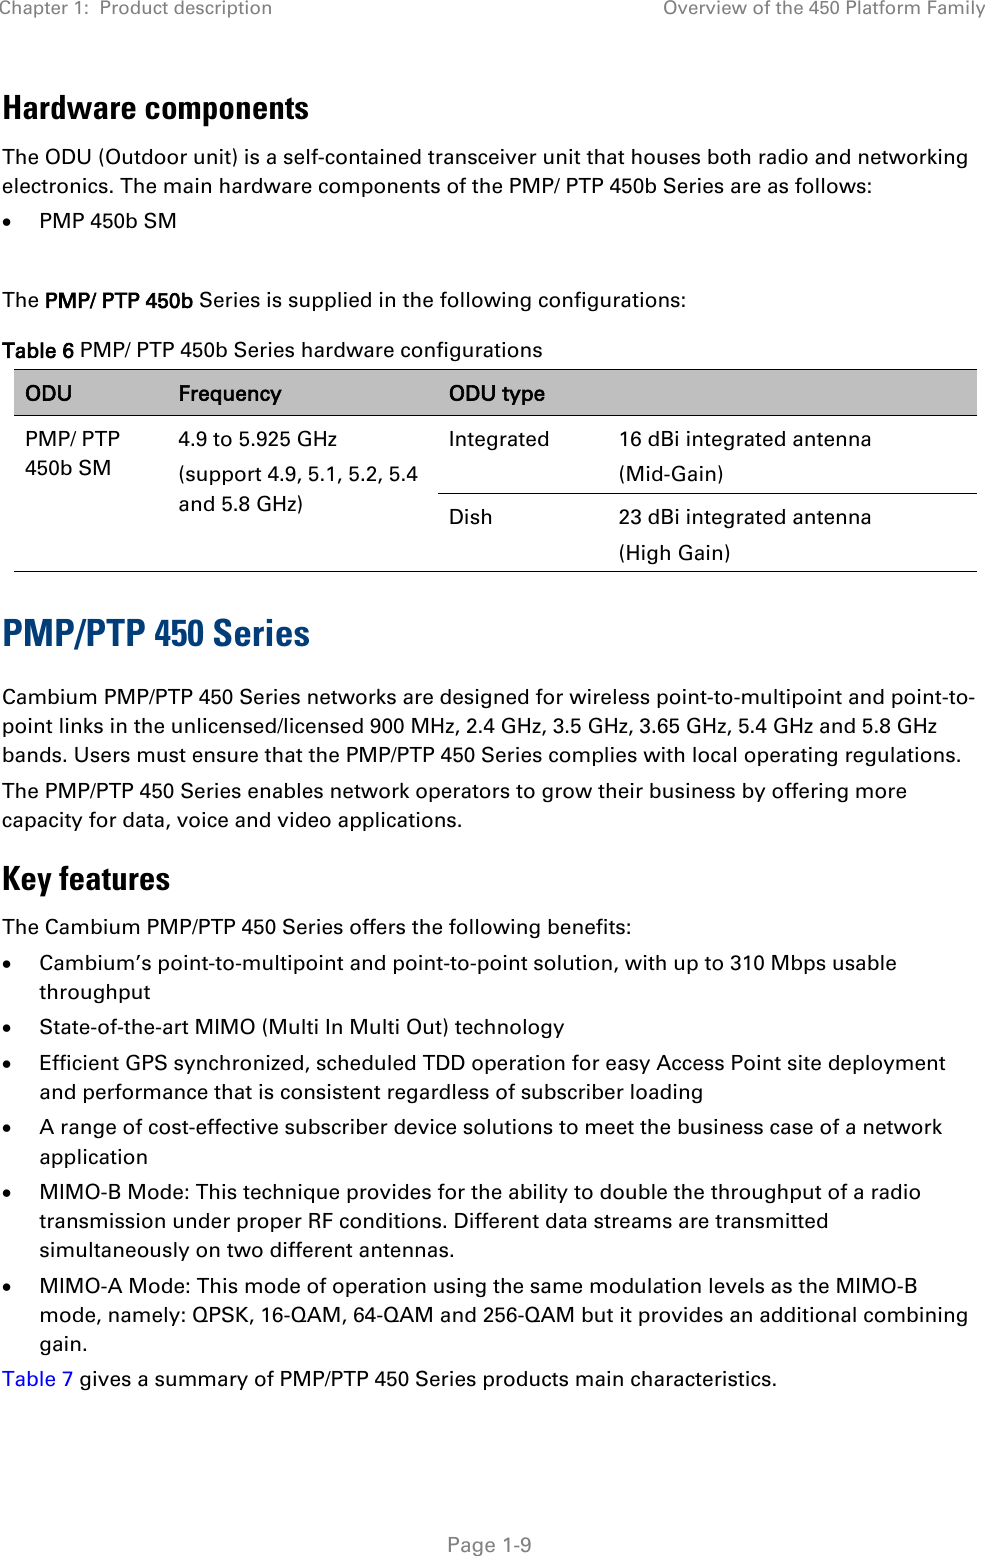 Chapter 1:  Product description Overview of the 450 Platform Family   Page 1-9 Hardware components The ODU (Outdoor unit) is a self-contained transceiver unit that houses both radio and networking electronics. The main hardware components of the PMP/ PTP 450b Series are as follows: • PMP 450b SM  The PMP/ PTP 450b Series is supplied in the following configurations: Table 6 PMP/ PTP 450b Series hardware configurations ODU Frequency ODU type  PMP/ PTP 450b SM 4.9 to 5.925 GHz (support 4.9, 5.1, 5.2, 5.4 and 5.8 GHz) Integrated  16 dBi integrated antenna  (Mid-Gain) Dish 23 dBi integrated antenna  (High Gain) PMP/PTP 450 Series Cambium PMP/PTP 450 Series networks are designed for wireless point-to-multipoint and point-to-point links in the unlicensed/licensed 900 MHz, 2.4 GHz, 3.5 GHz, 3.65 GHz, 5.4 GHz and 5.8 GHz bands. Users must ensure that the PMP/PTP 450 Series complies with local operating regulations.  The PMP/PTP 450 Series enables network operators to grow their business by offering more capacity for data, voice and video applications. Key features The Cambium PMP/PTP 450 Series offers the following benefits:  • Cambium’s point-to-multipoint and point-to-point solution, with up to 310 Mbps usable throughput  • State-of-the-art MIMO (Multi In Multi Out) technology  • Efficient GPS synchronized, scheduled TDD operation for easy Access Point site deployment and performance that is consistent regardless of subscriber loading  • A range of cost-effective subscriber device solutions to meet the business case of a network application  • MIMO-B Mode: This technique provides for the ability to double the throughput of a radio transmission under proper RF conditions. Different data streams are transmitted simultaneously on two different antennas.  • MIMO-A Mode: This mode of operation using the same modulation levels as the MIMO-B mode, namely: QPSK, 16-QAM, 64-QAM and 256-QAM but it provides an additional combining gain. Table 7 gives a summary of PMP/PTP 450 Series products main characteristics.   